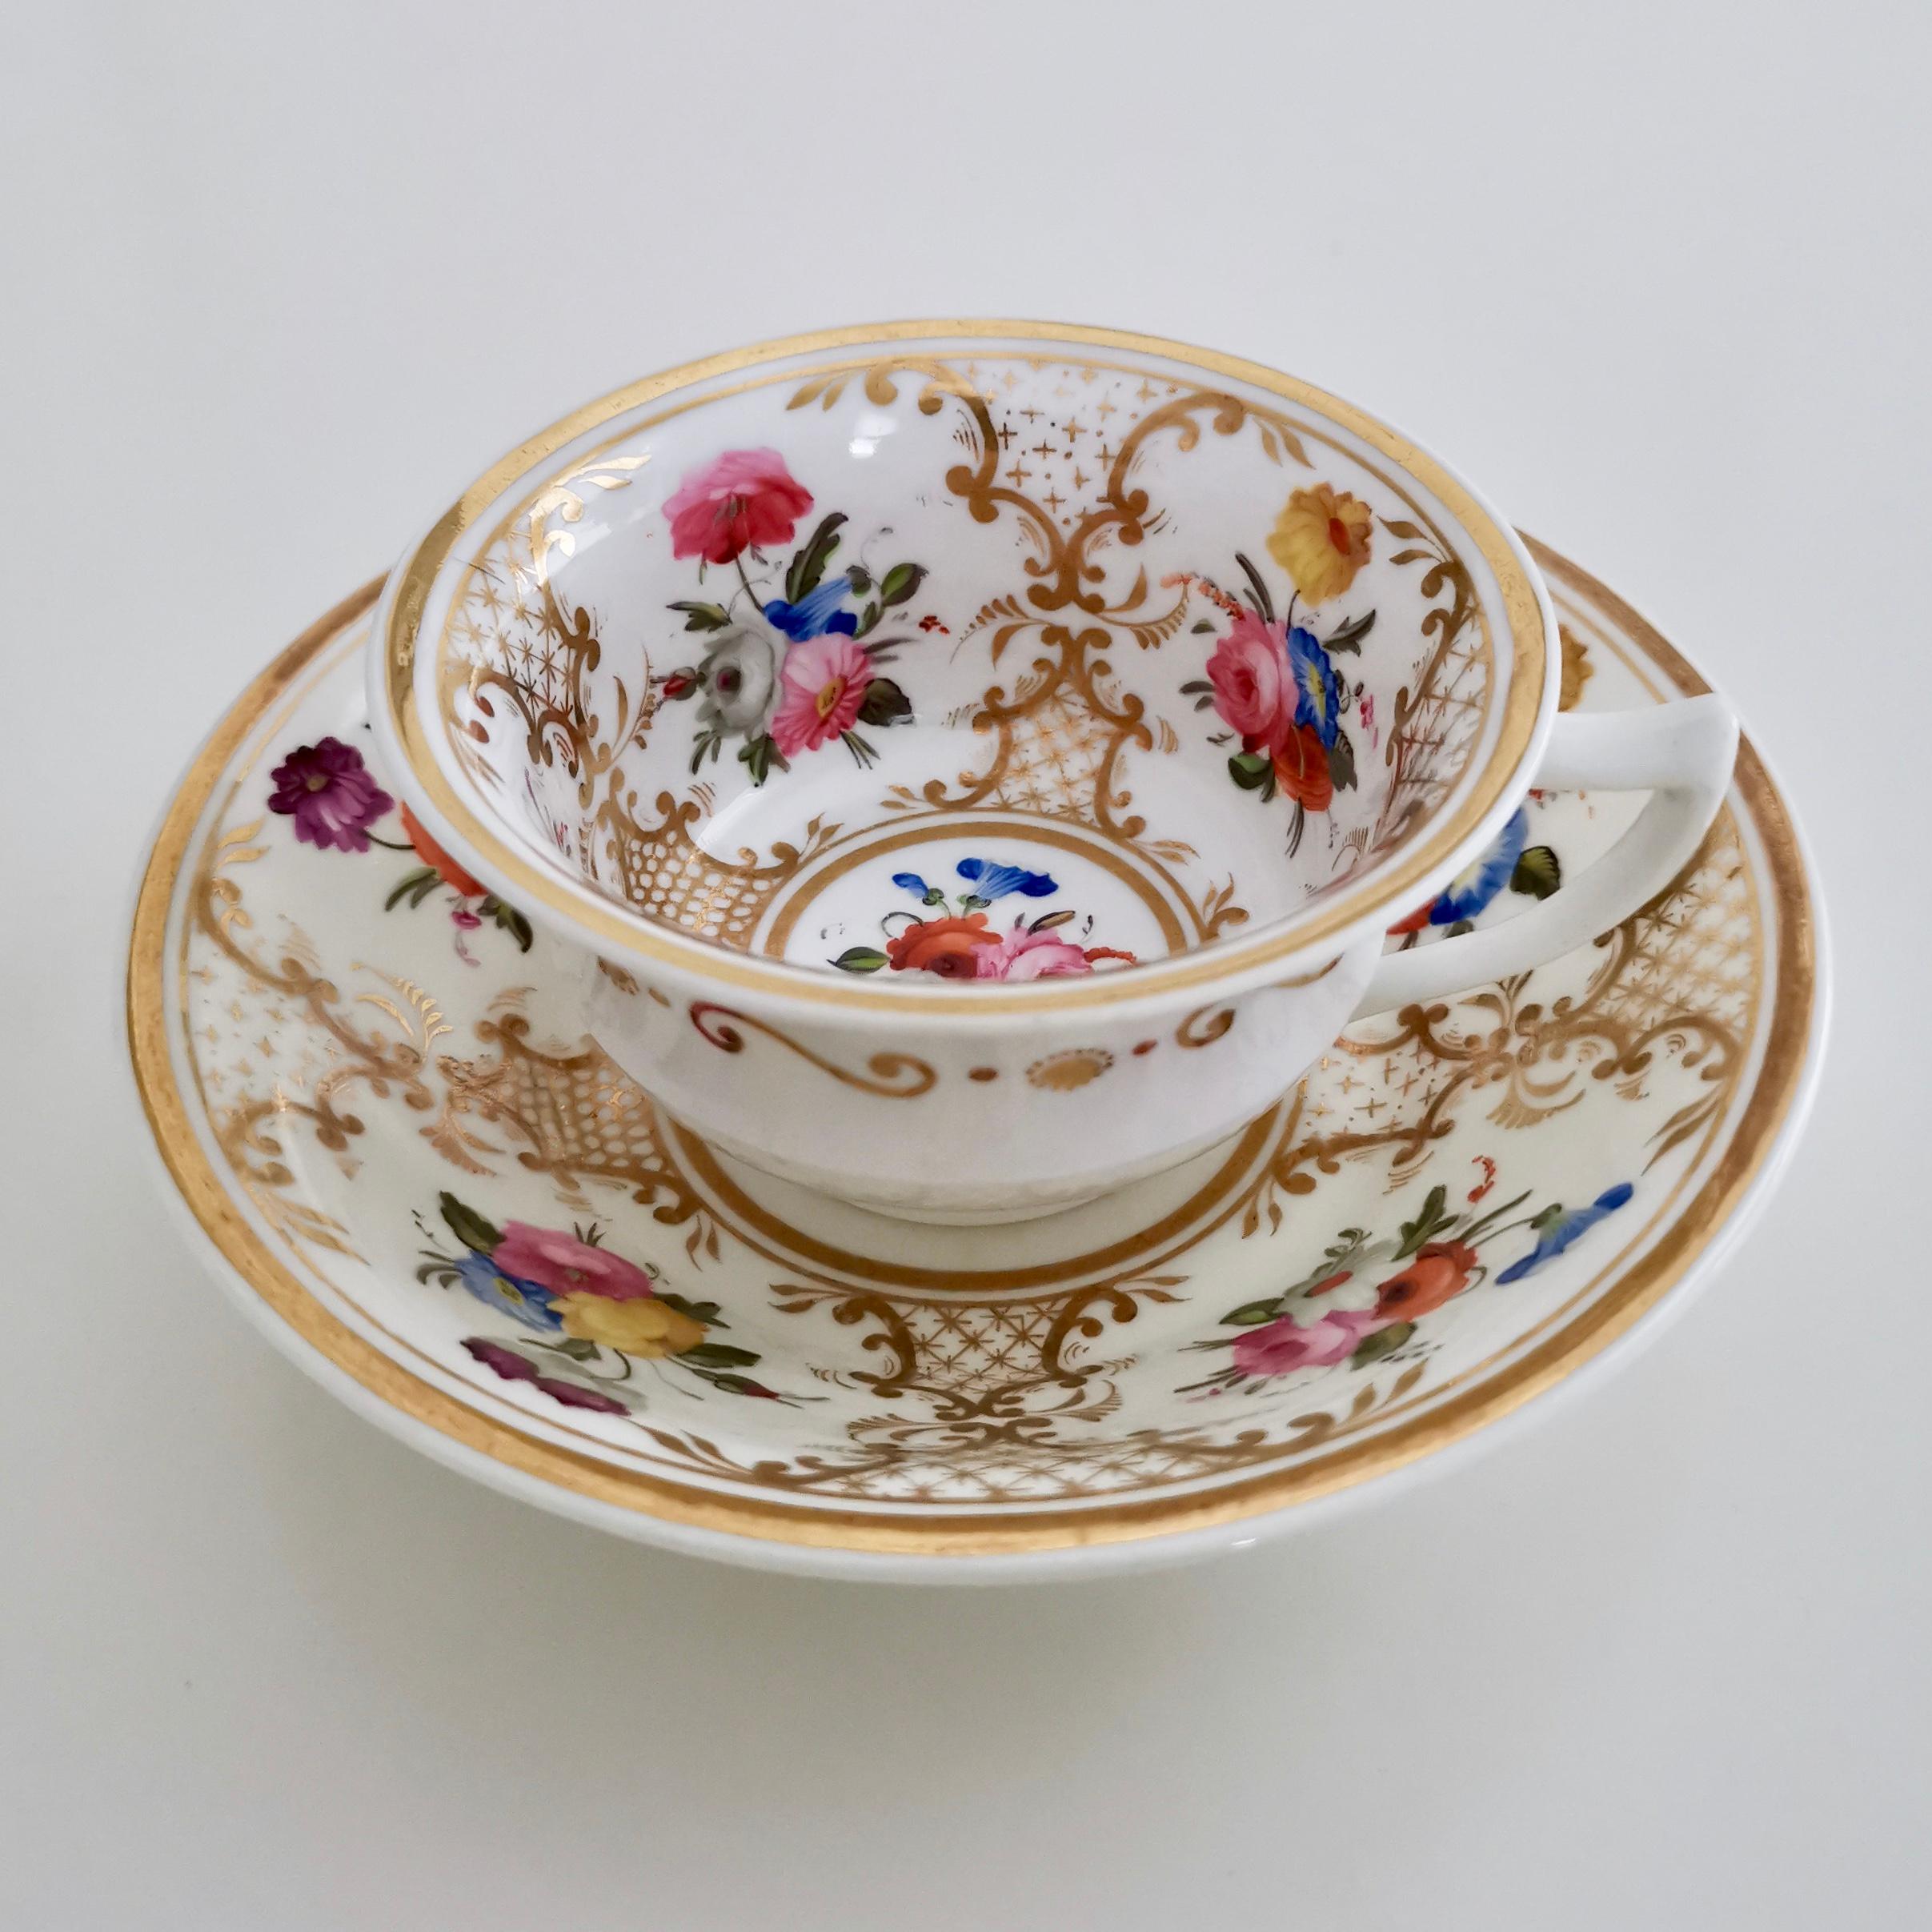 Rathbone Porcelain Teacup Trio, Hand Painted Flowers and Gilt, Regency ca 1820 (Englisch)